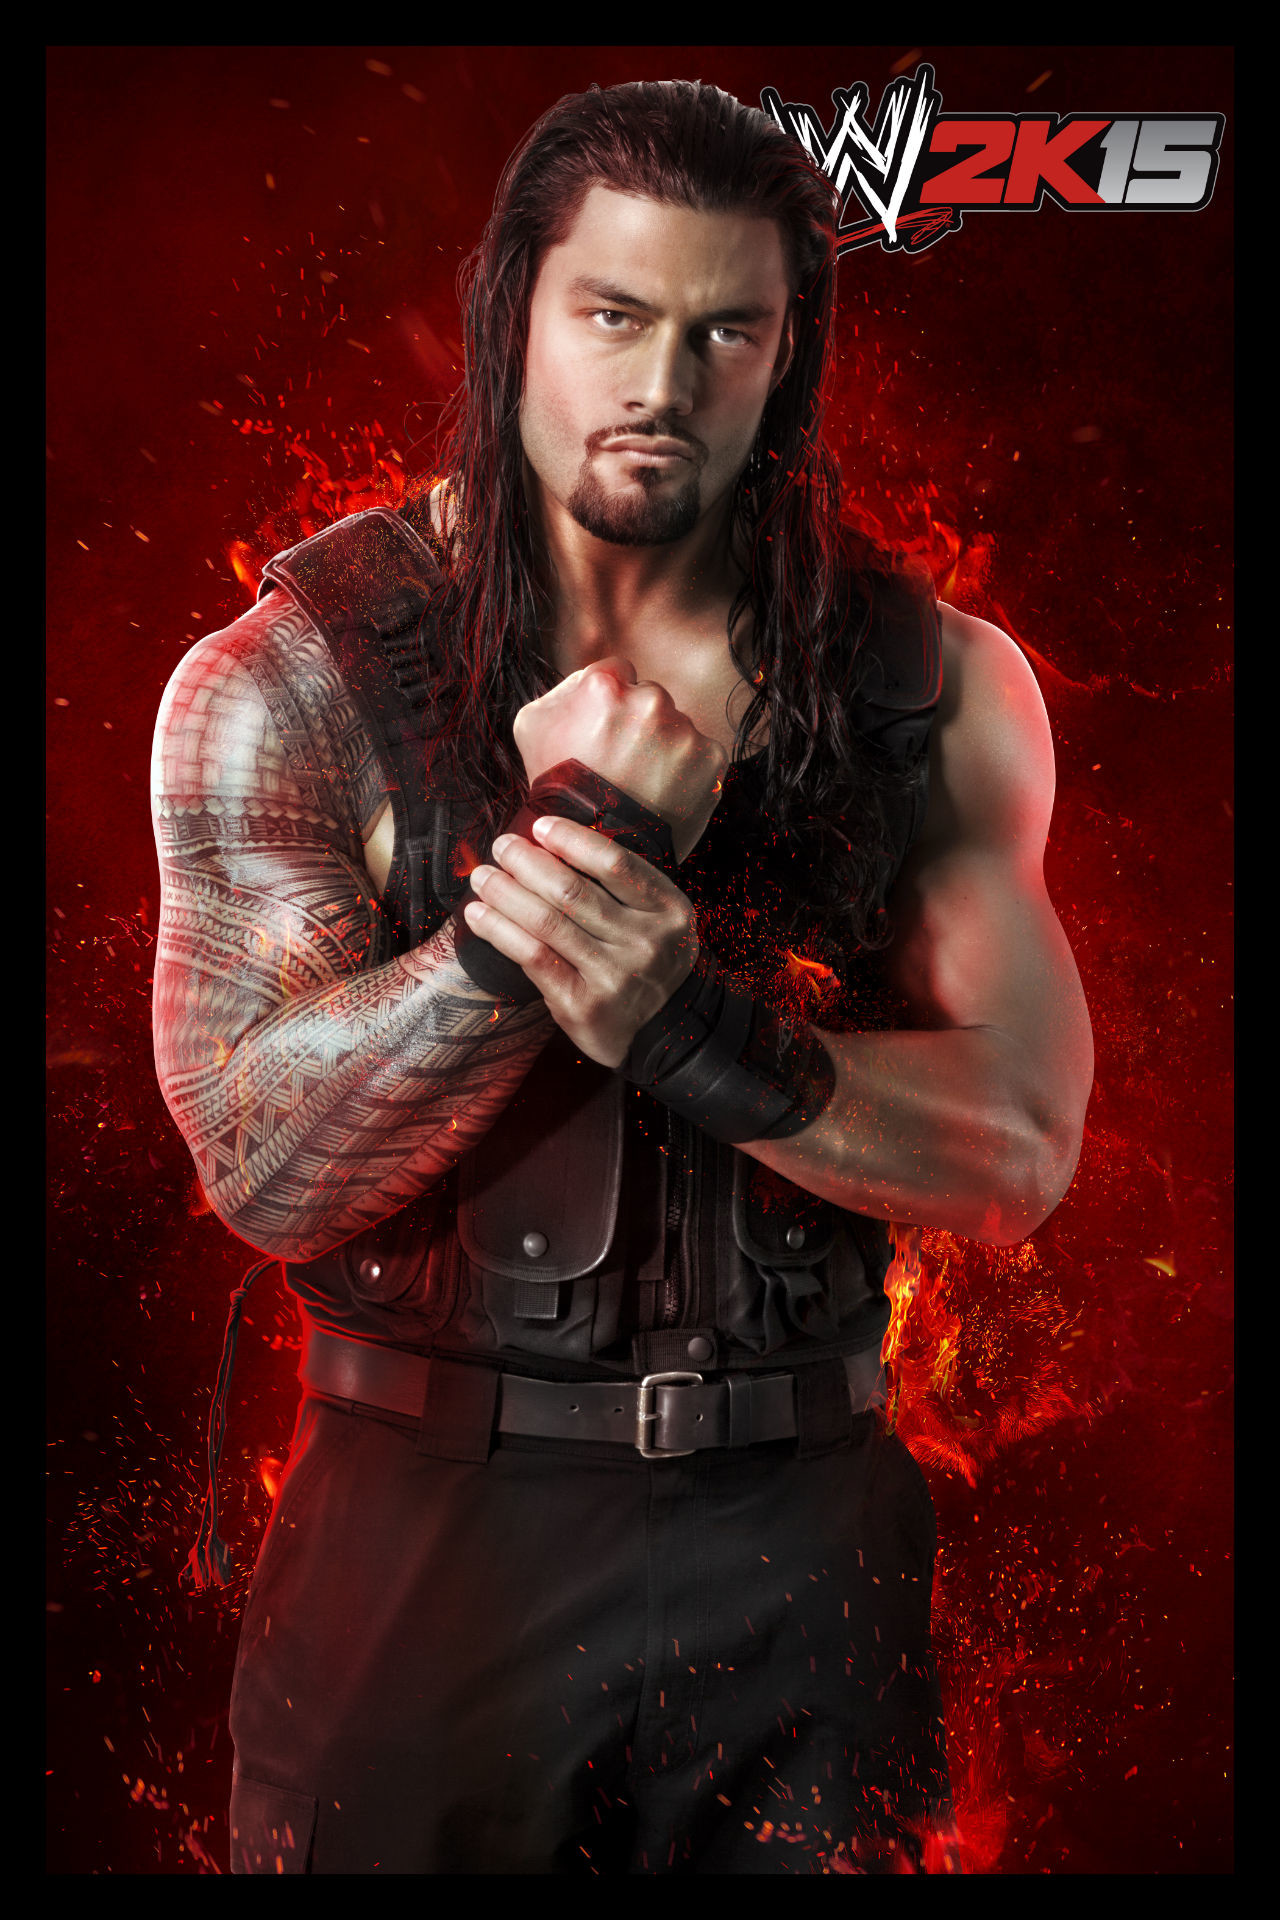 1280x1920 Dean Ambrose And Roman Reigns images Roman Reigns WWE 2K15 HD wallpaper and  background photos